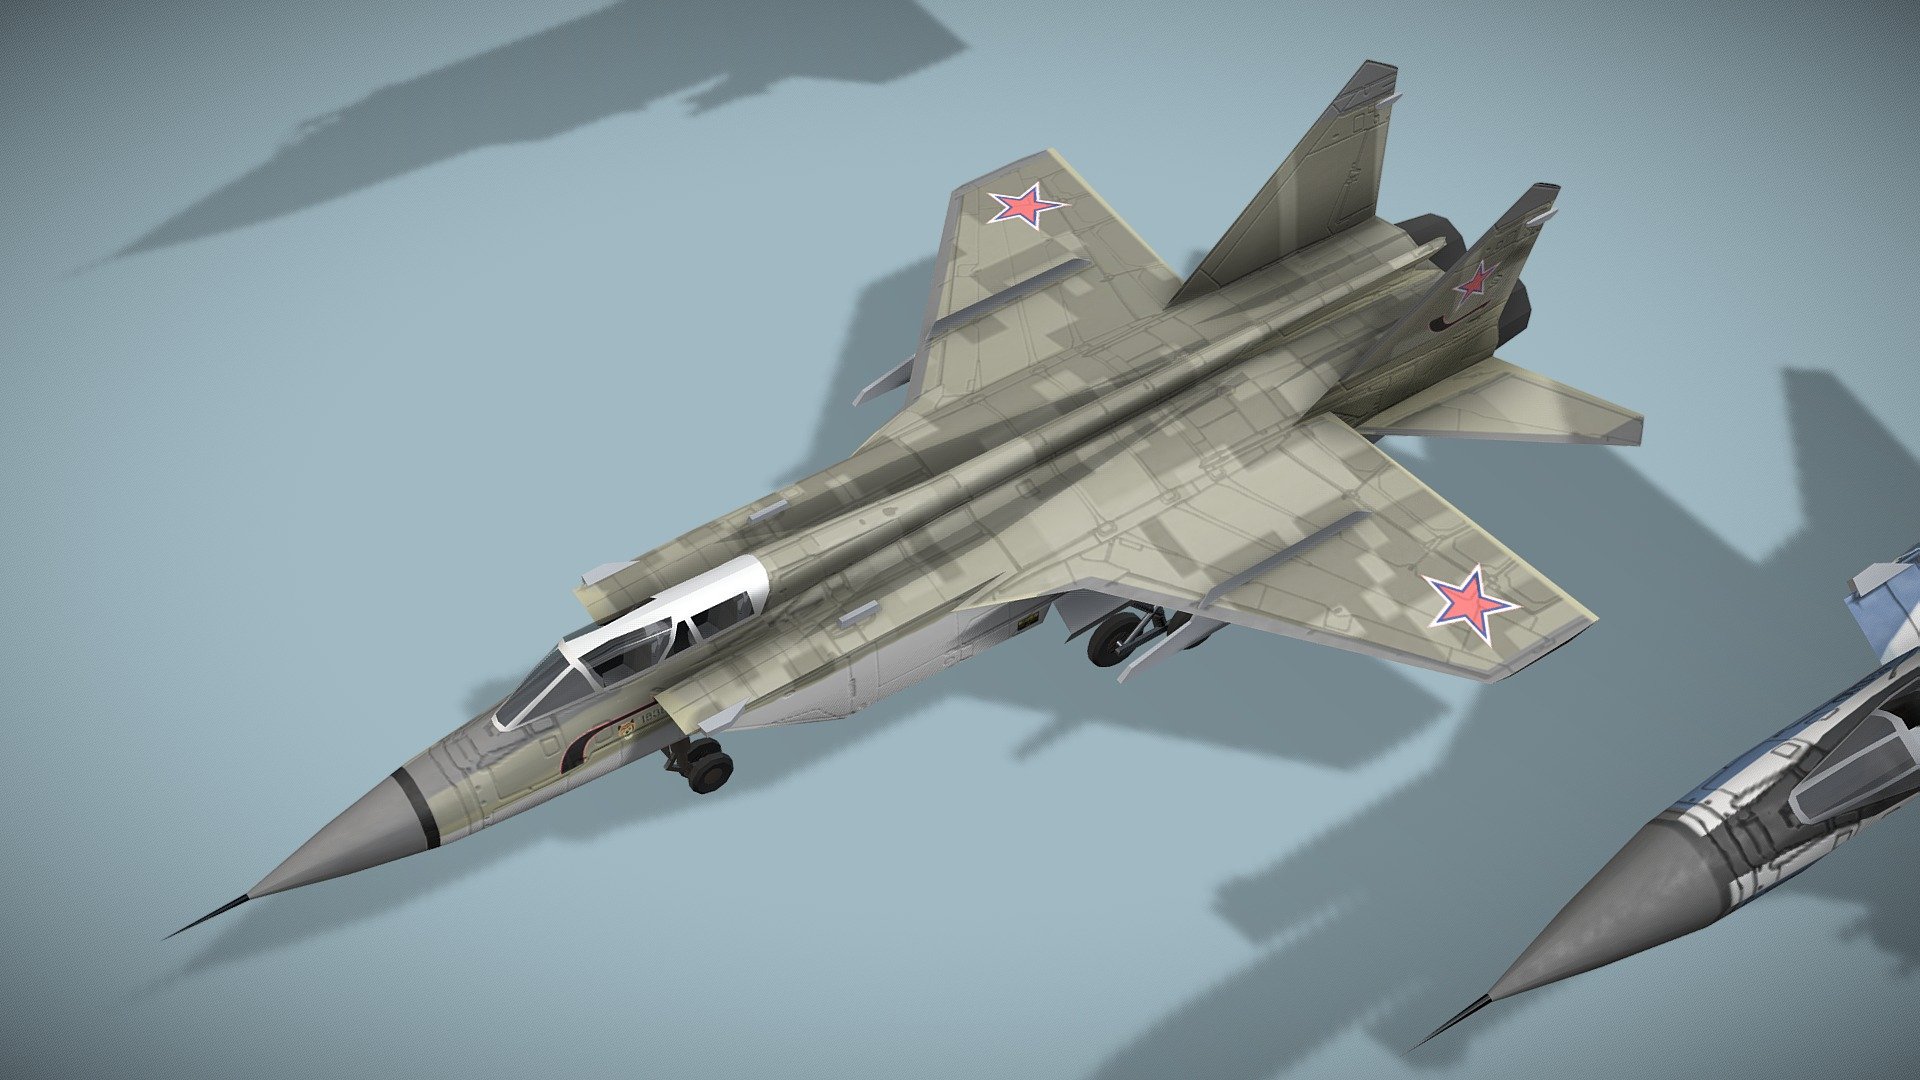 MIG-31 Foxhound

Lowpoly model of russian jet fighter



The Mikoyan MiG-31 is a supersonic interceptor aircraft that was developed for use by the Soviet Air Forces. The aircraft was designed by the Mikoyan design bureau as a replacement for the earlier MiG-25 &ldquo;Foxbat